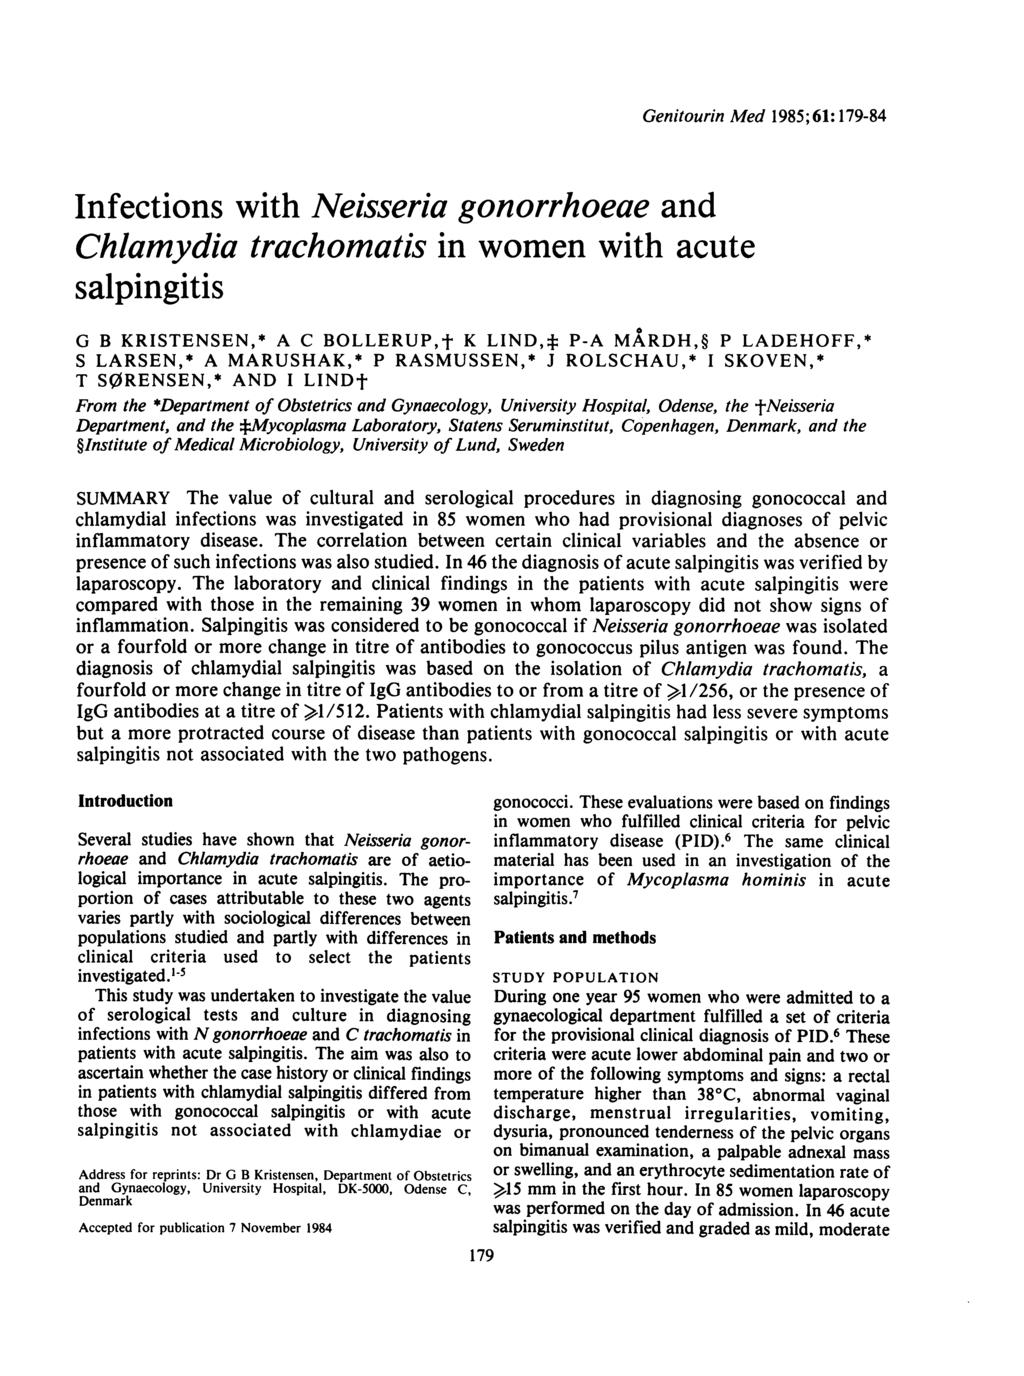 Infections with Neisseria gonorrhoeae and Chlamydia trachomatis in women with acute salpingitis Genitourin Med 1985;61:179-84 G B KRISTENSEN,* A C BOLLERUP,t K LIND,* P-A MARDH, P LADEHOFF,* S